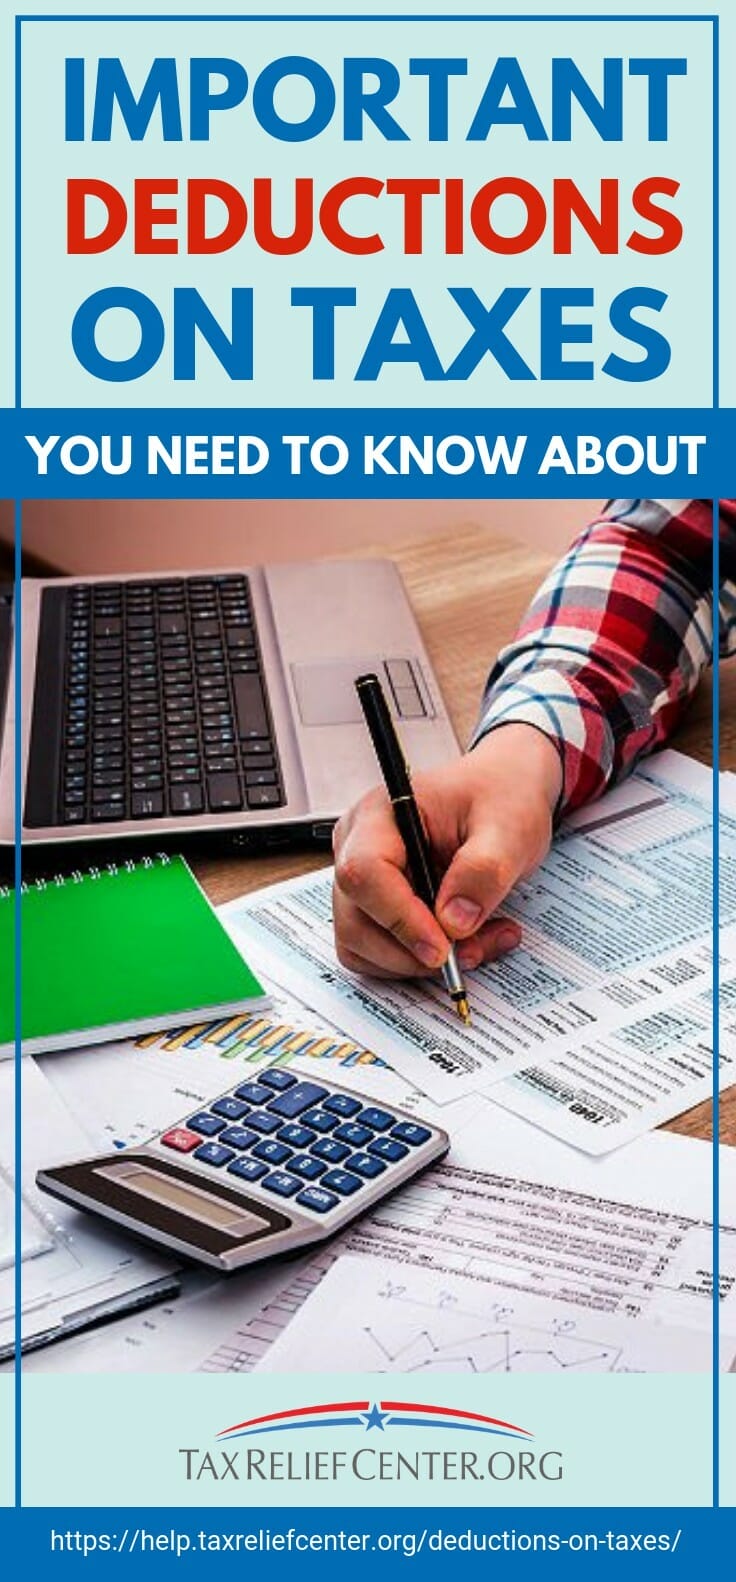 Important Deductions On Taxes You Need To Know About https://help.taxreliefcenter.org/deductions-on-taxes/